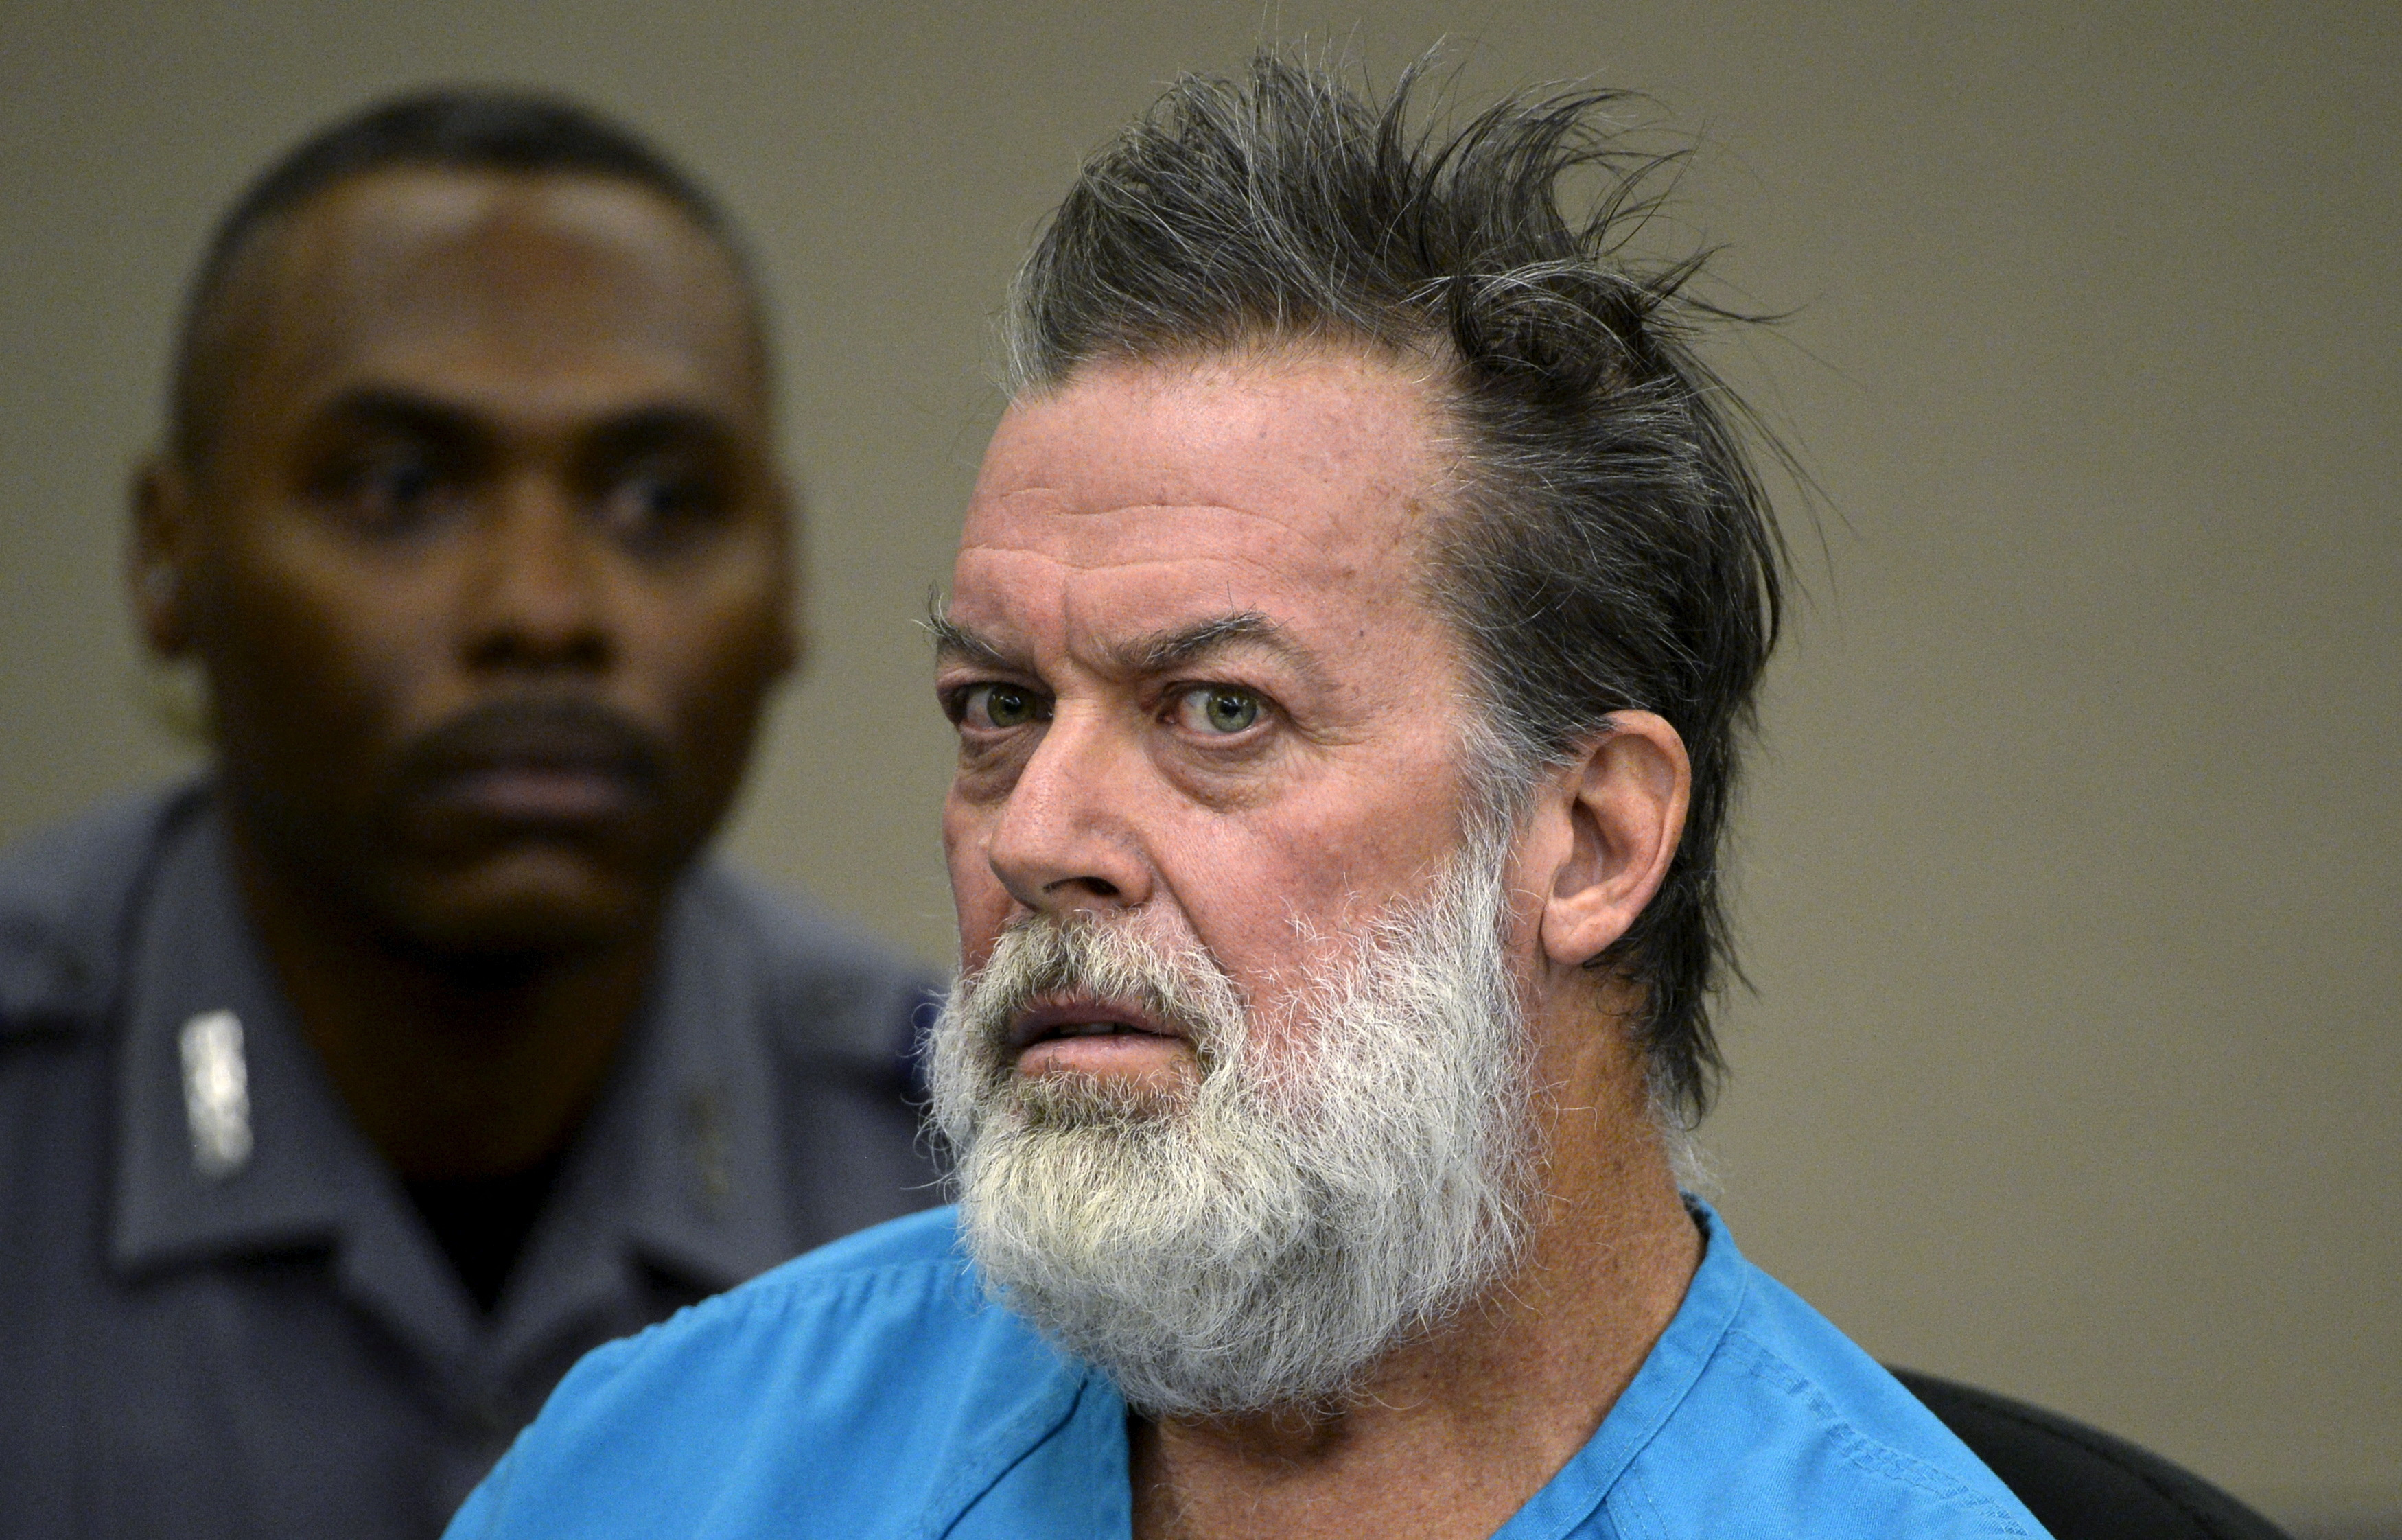 Robert Lewis Dear accused of shooting three people to death at a Planned Parenthood clinic in Colorado attends his hearing in Colorado Springs